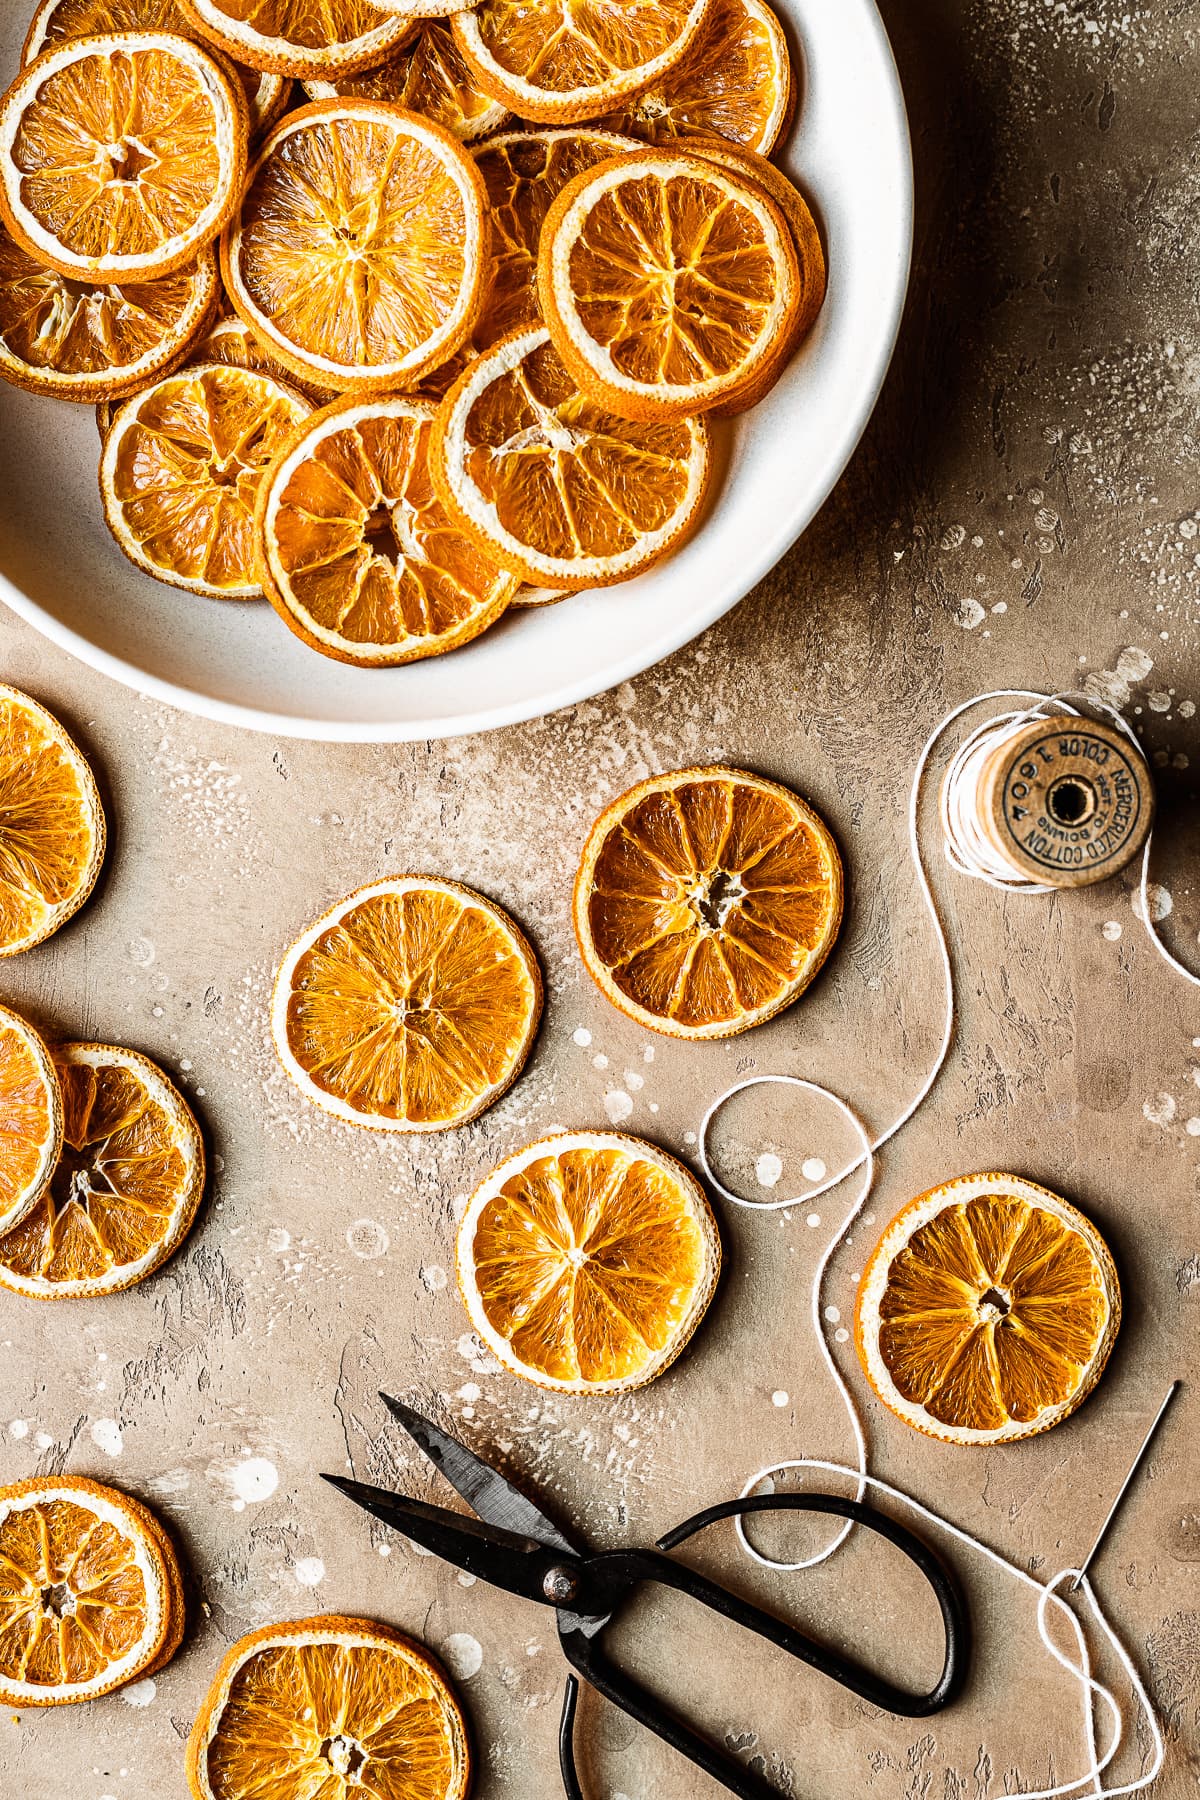 Dried orange slices in a white bowl and resting on a tan speckled surface. A pair of scissors and a spool of thread with a needle rest nearby to make the citrus slices into a garland.